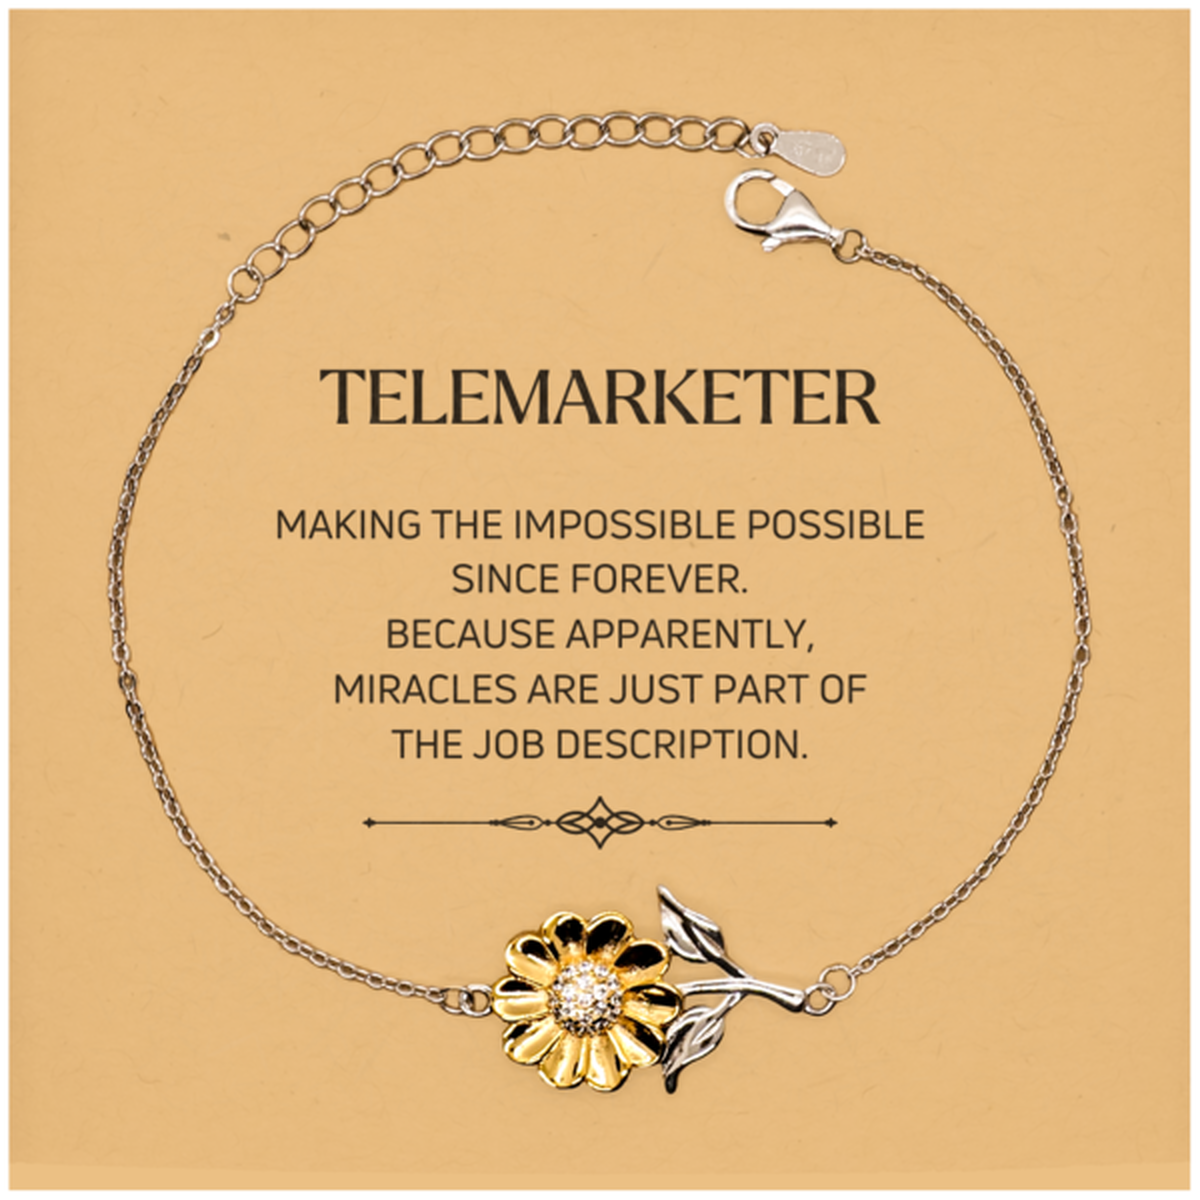 Funny Telemarketer Gifts, Miracles are just part of the job description, Inspirational Birthday Christmas Sunflower Bracelet For Telemarketer, Men, Women, Coworkers, Friends, Boss